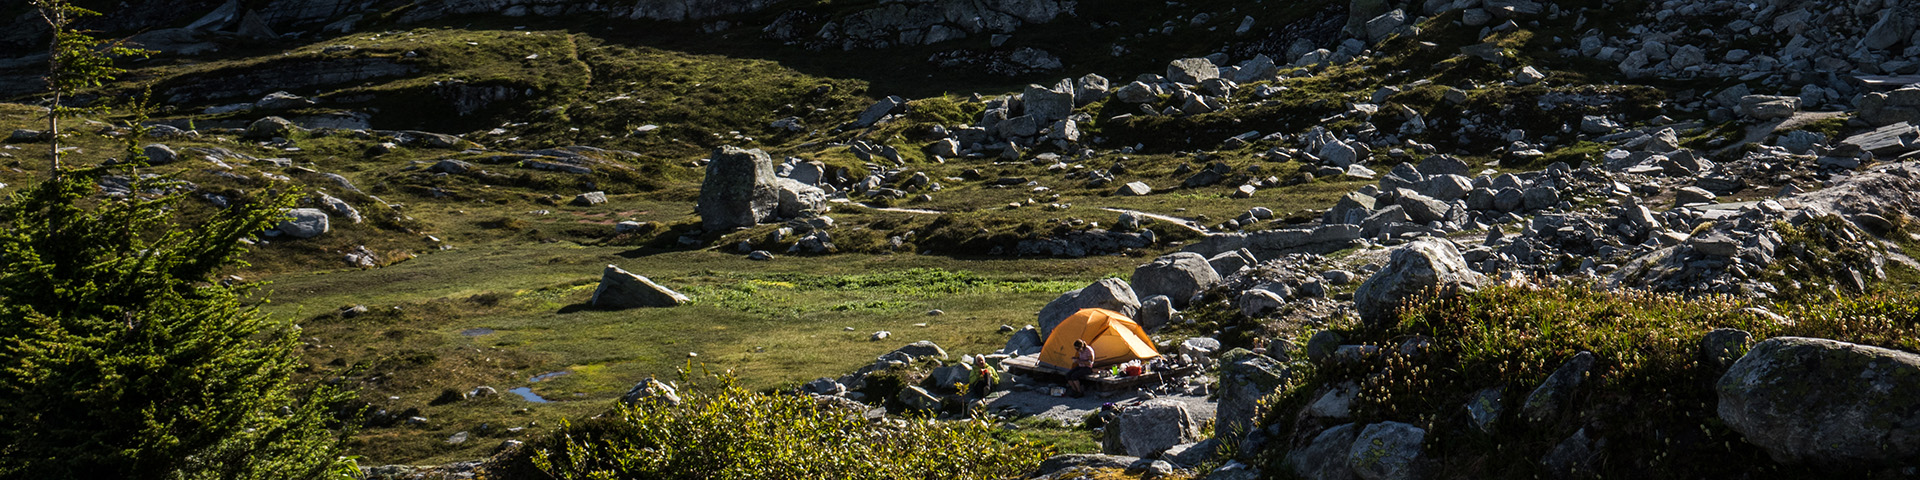 Orange tent on a tent pad on a rocky meadow